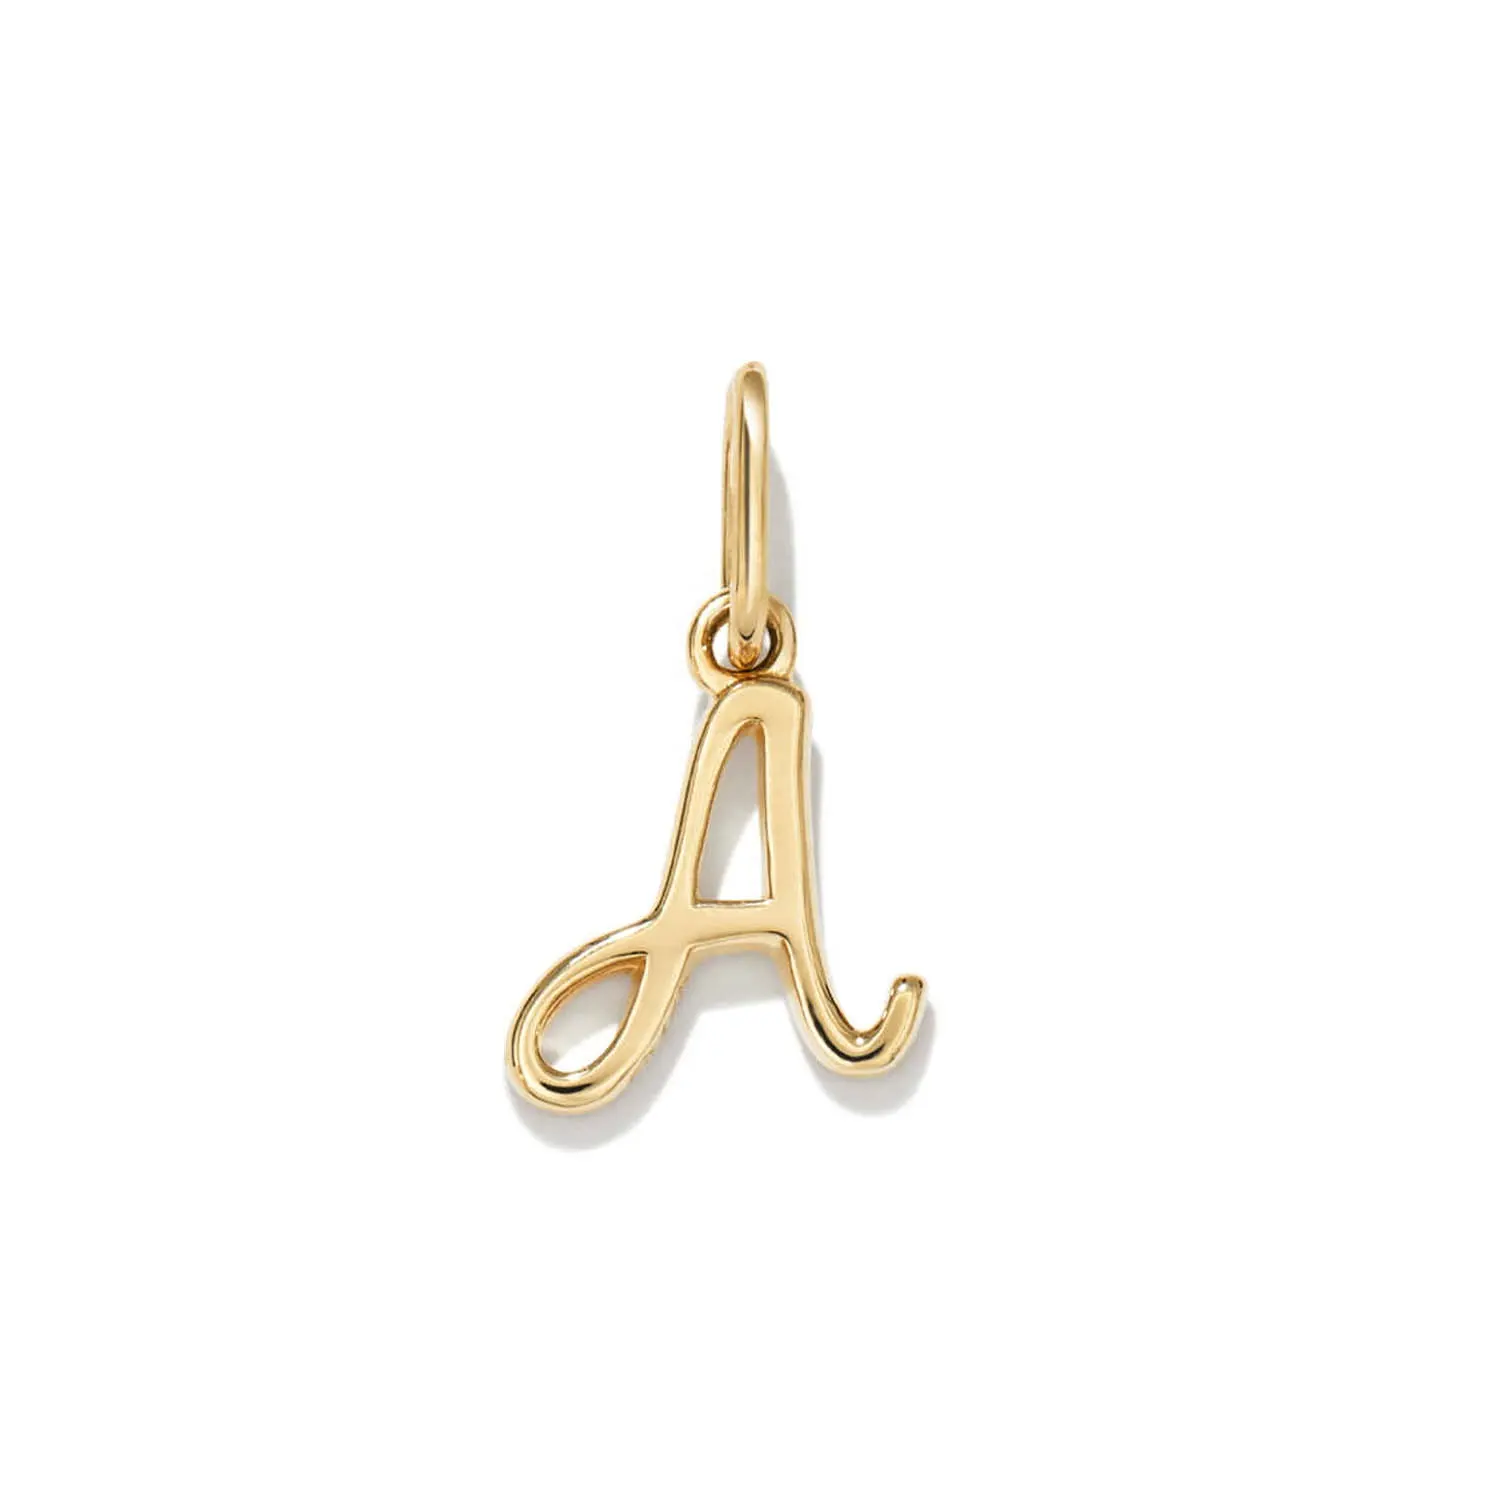 Gemnel new design 925 silver initials letter charm pendant necklace